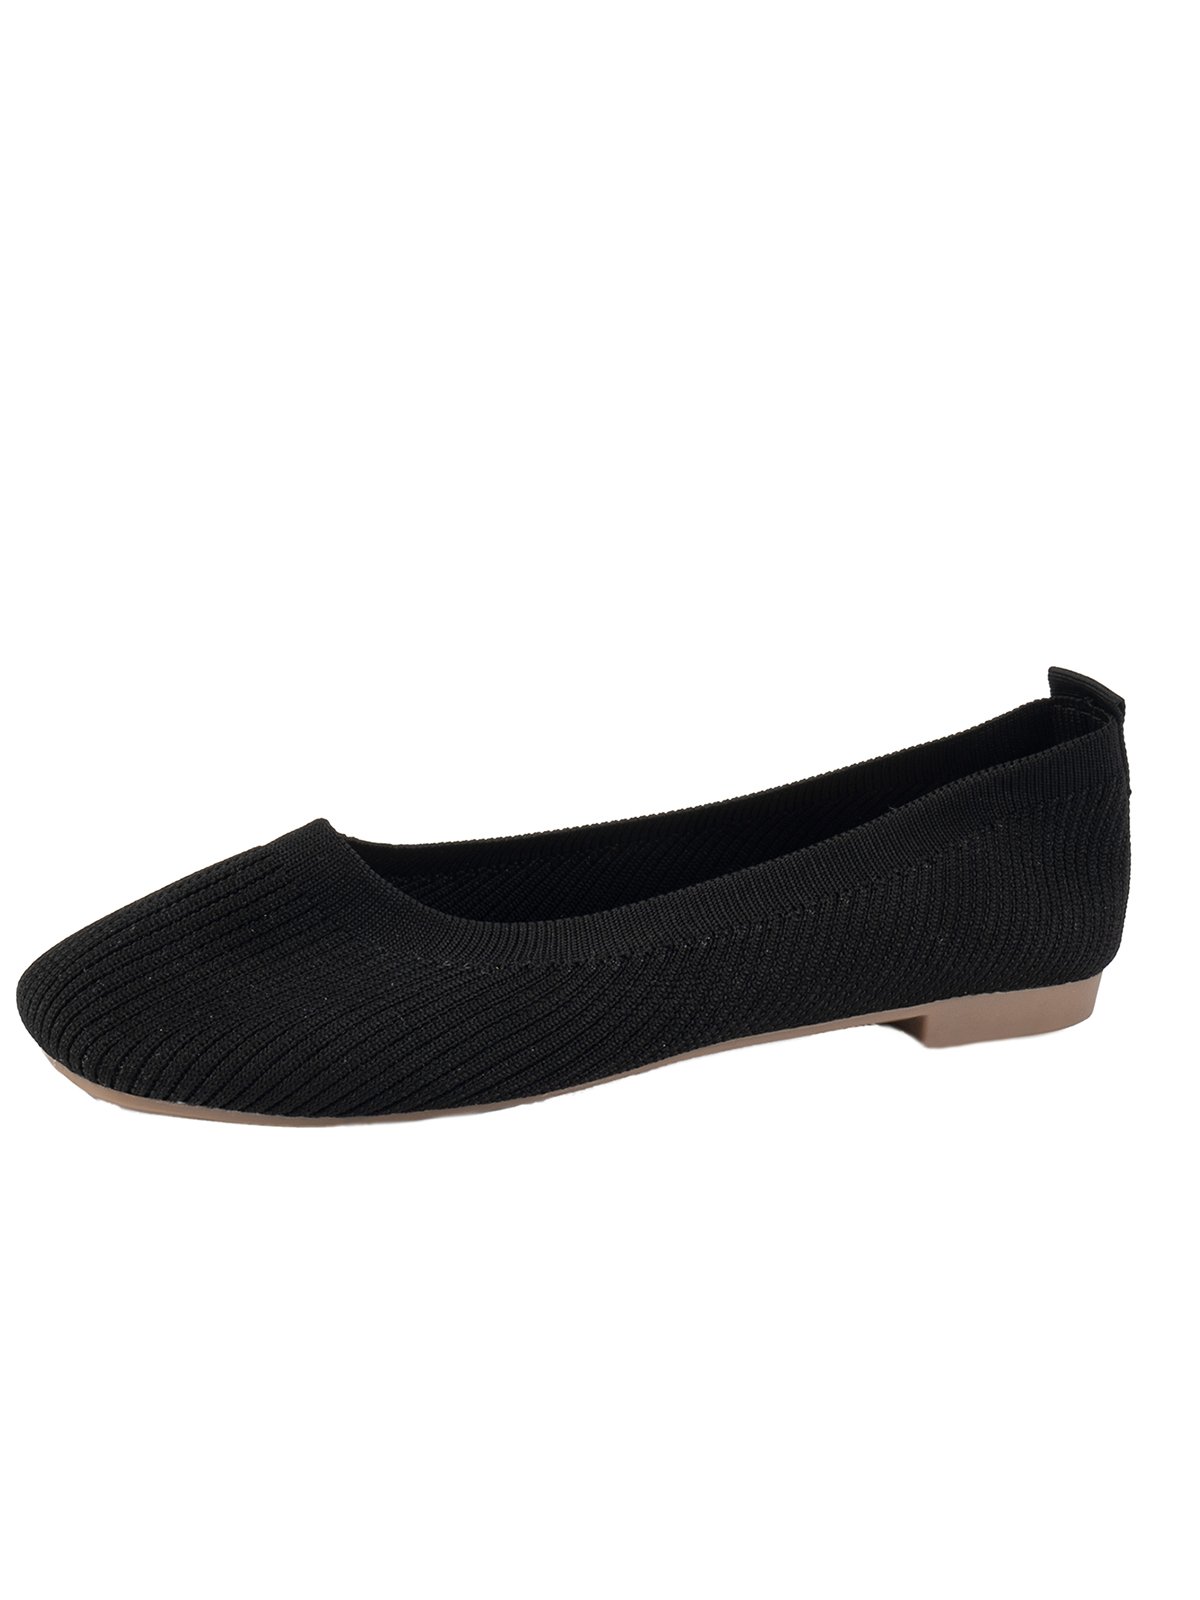 Casual Square Toe Comfy Insole Commuting Breathable Slip On Shallow Shoes